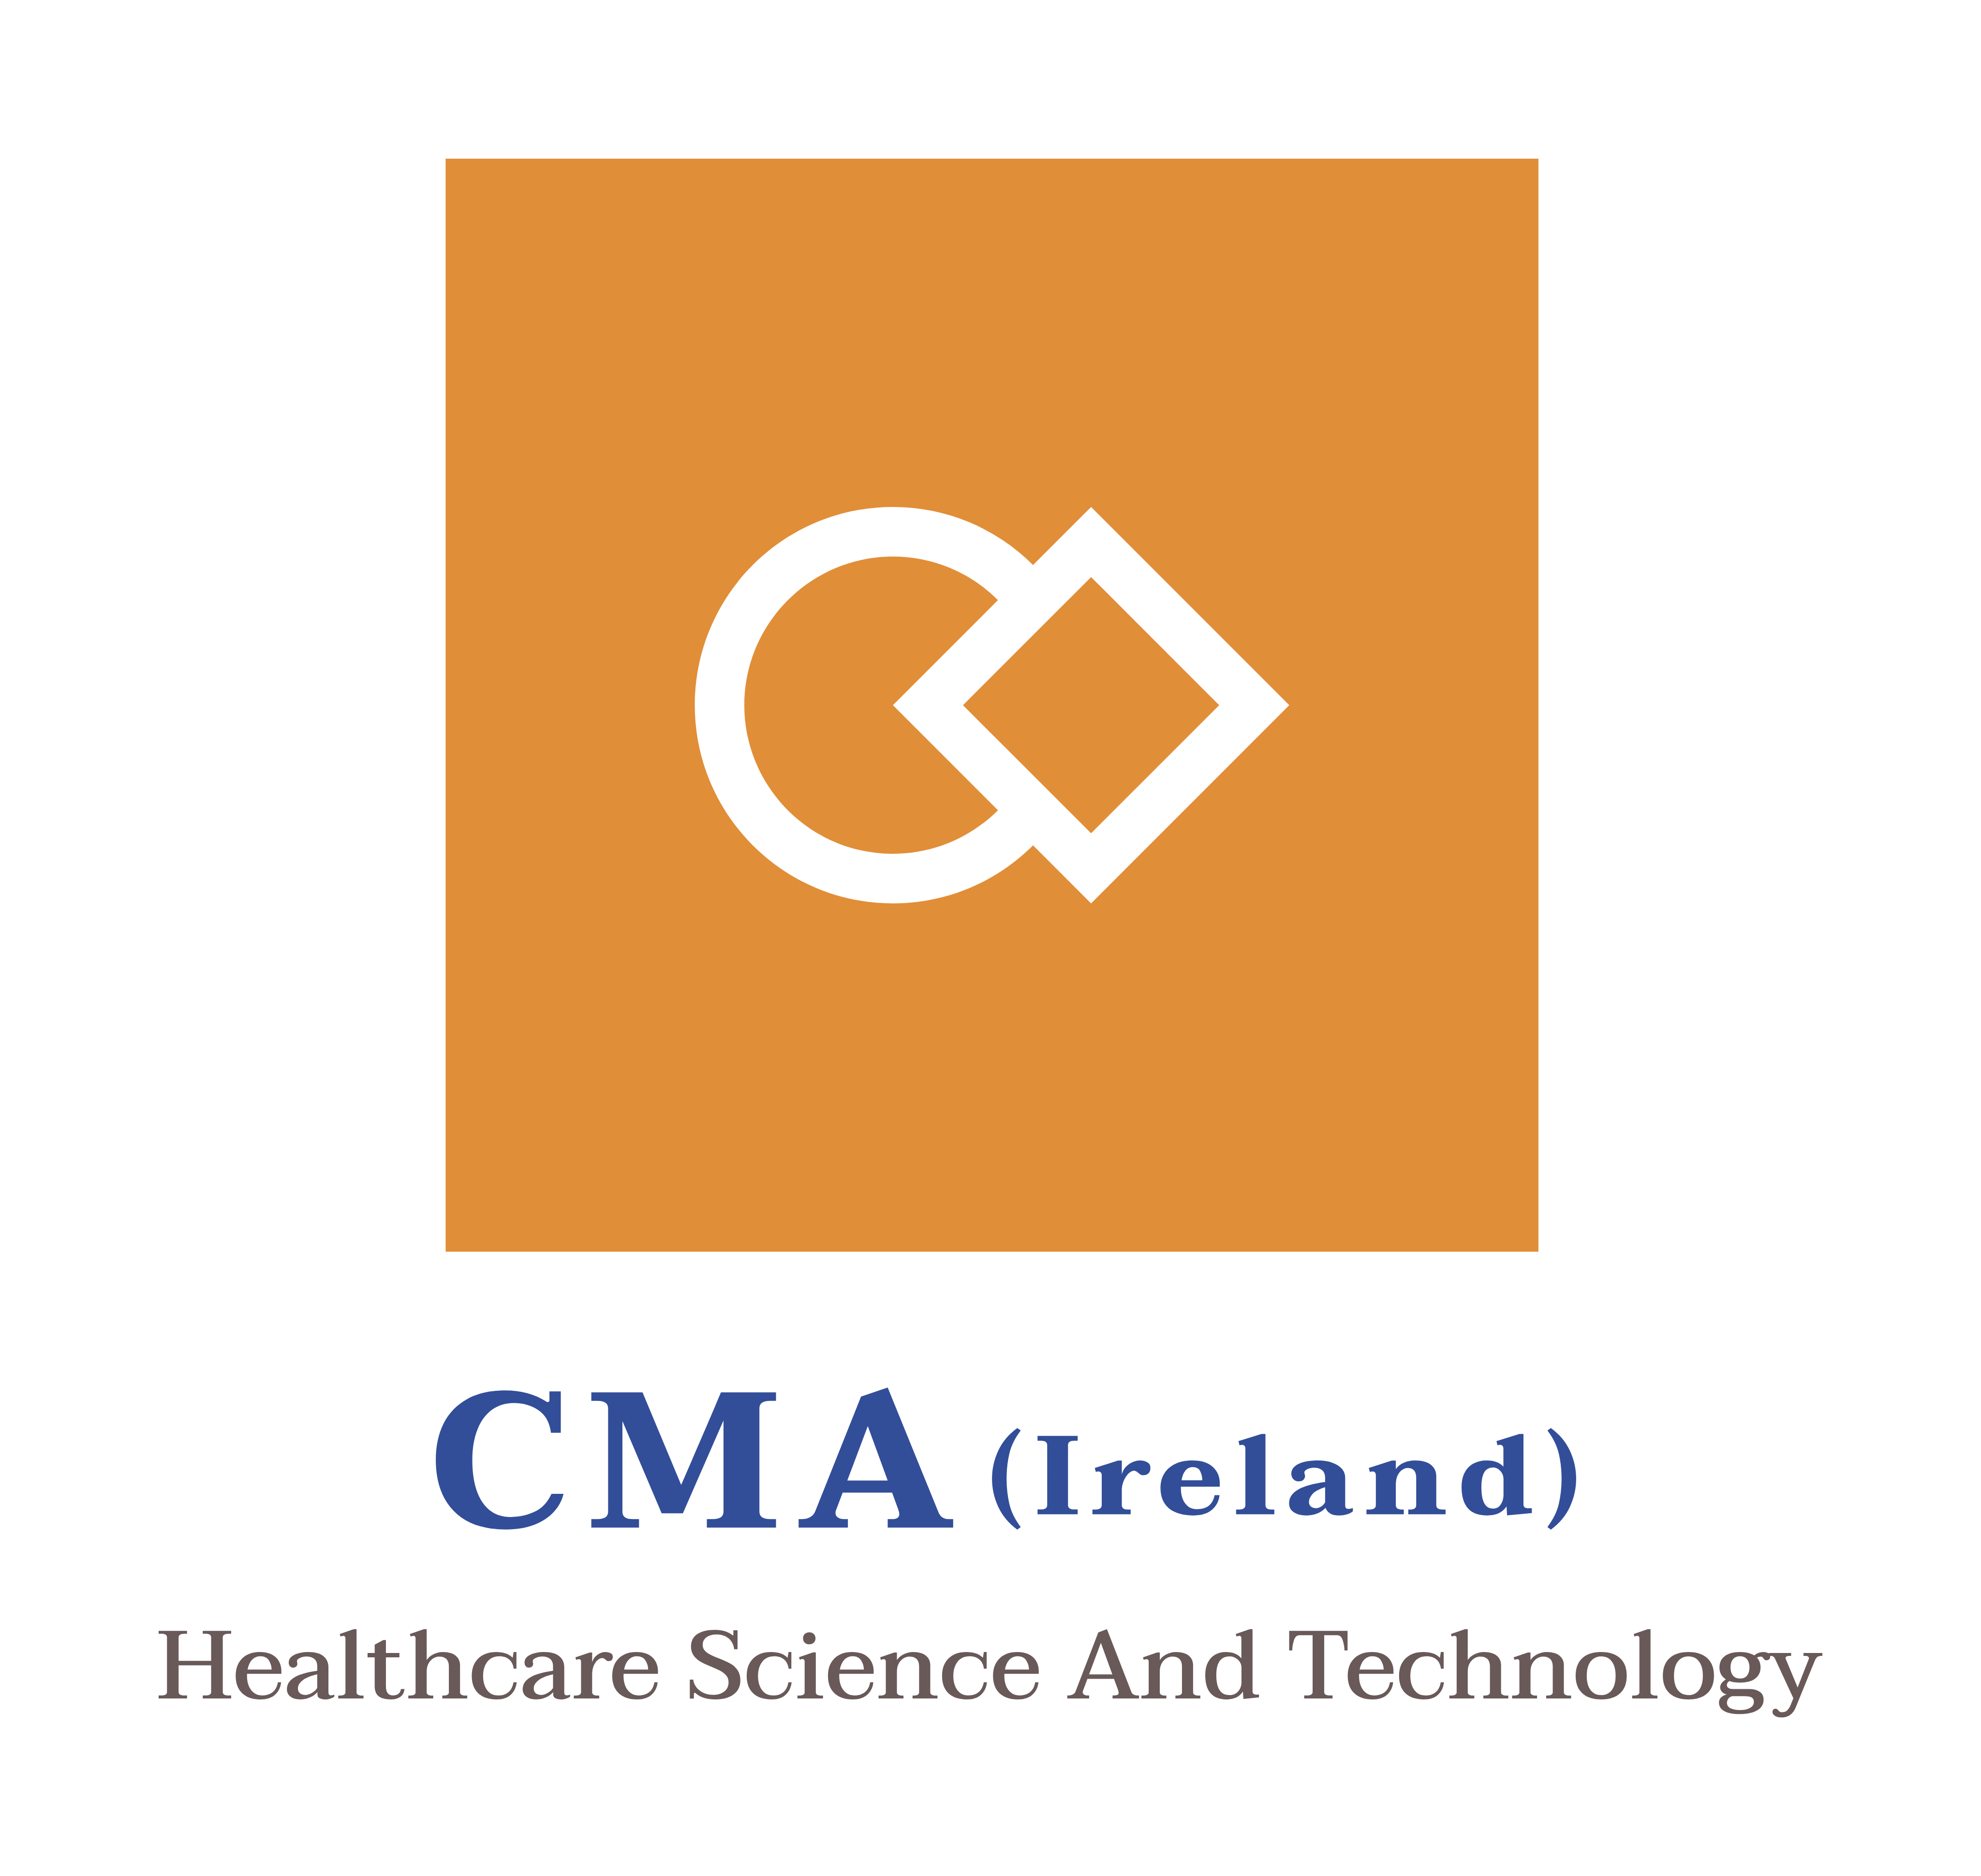 CMA Ireland Healthcare Science And Technology